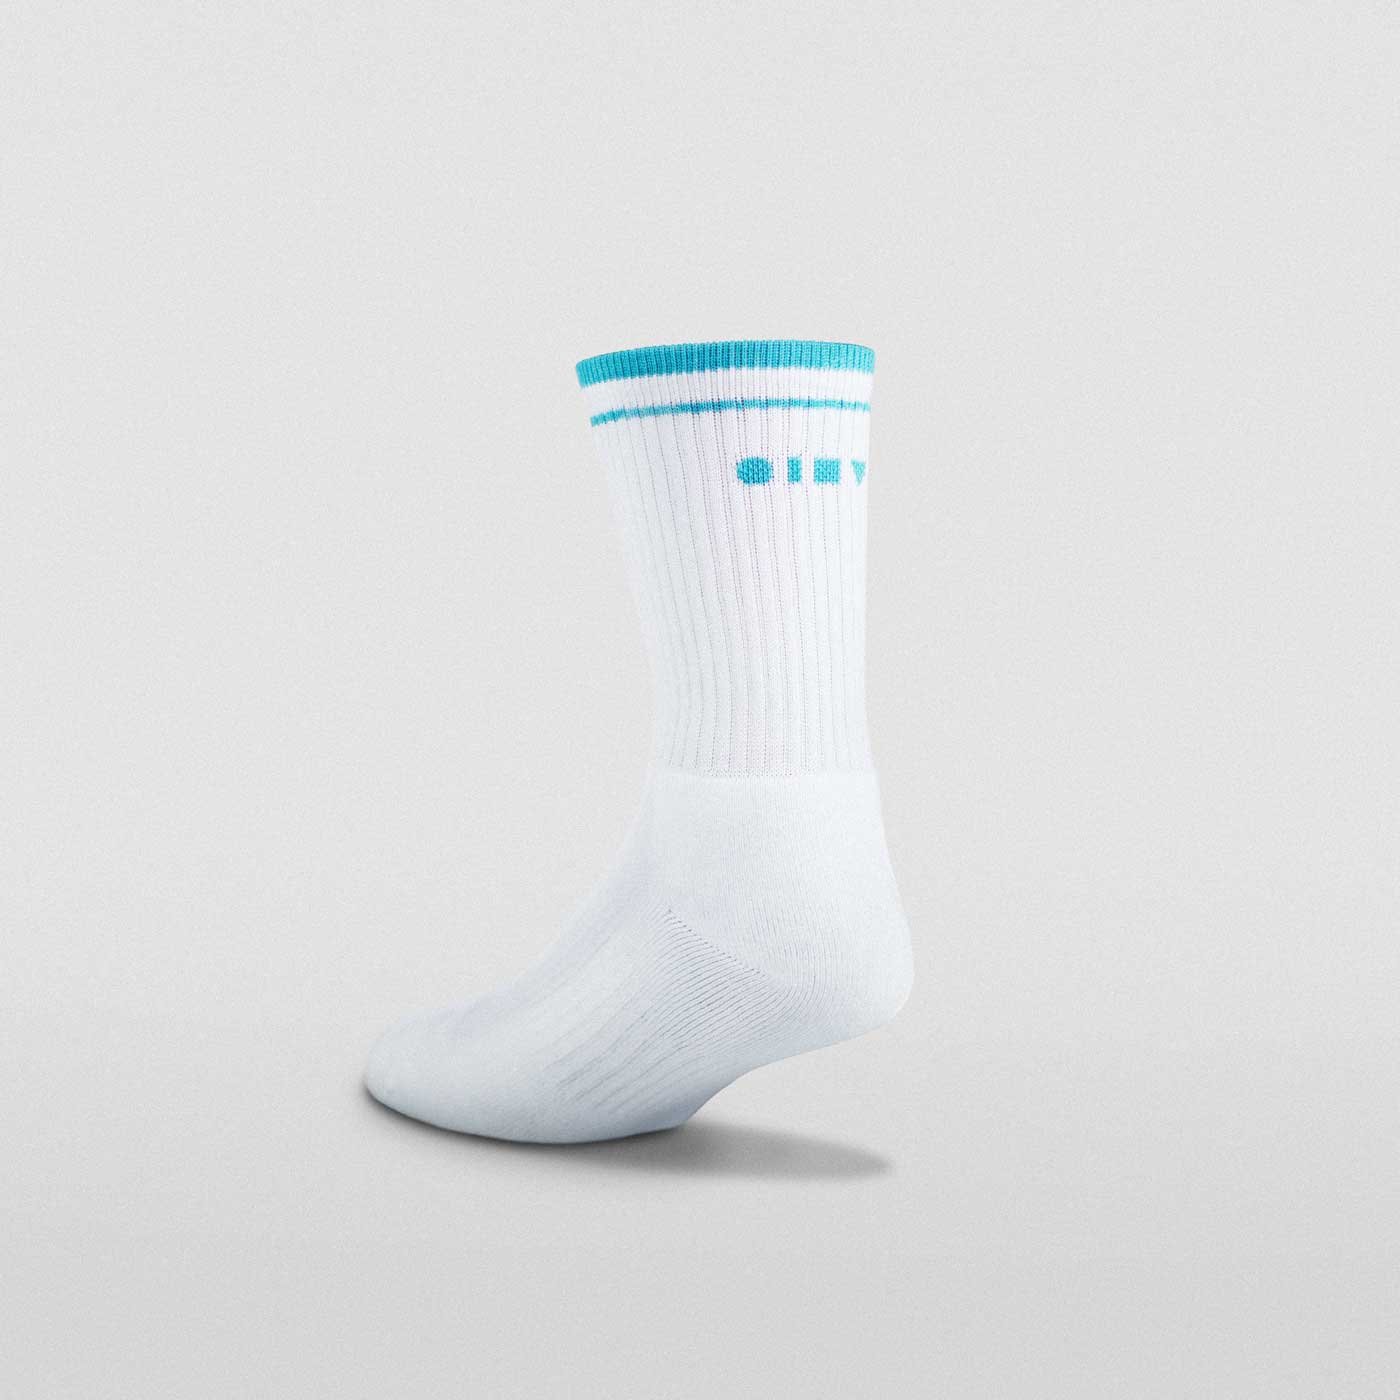 Men's tennis socks. Made in Australia by Clay Active.